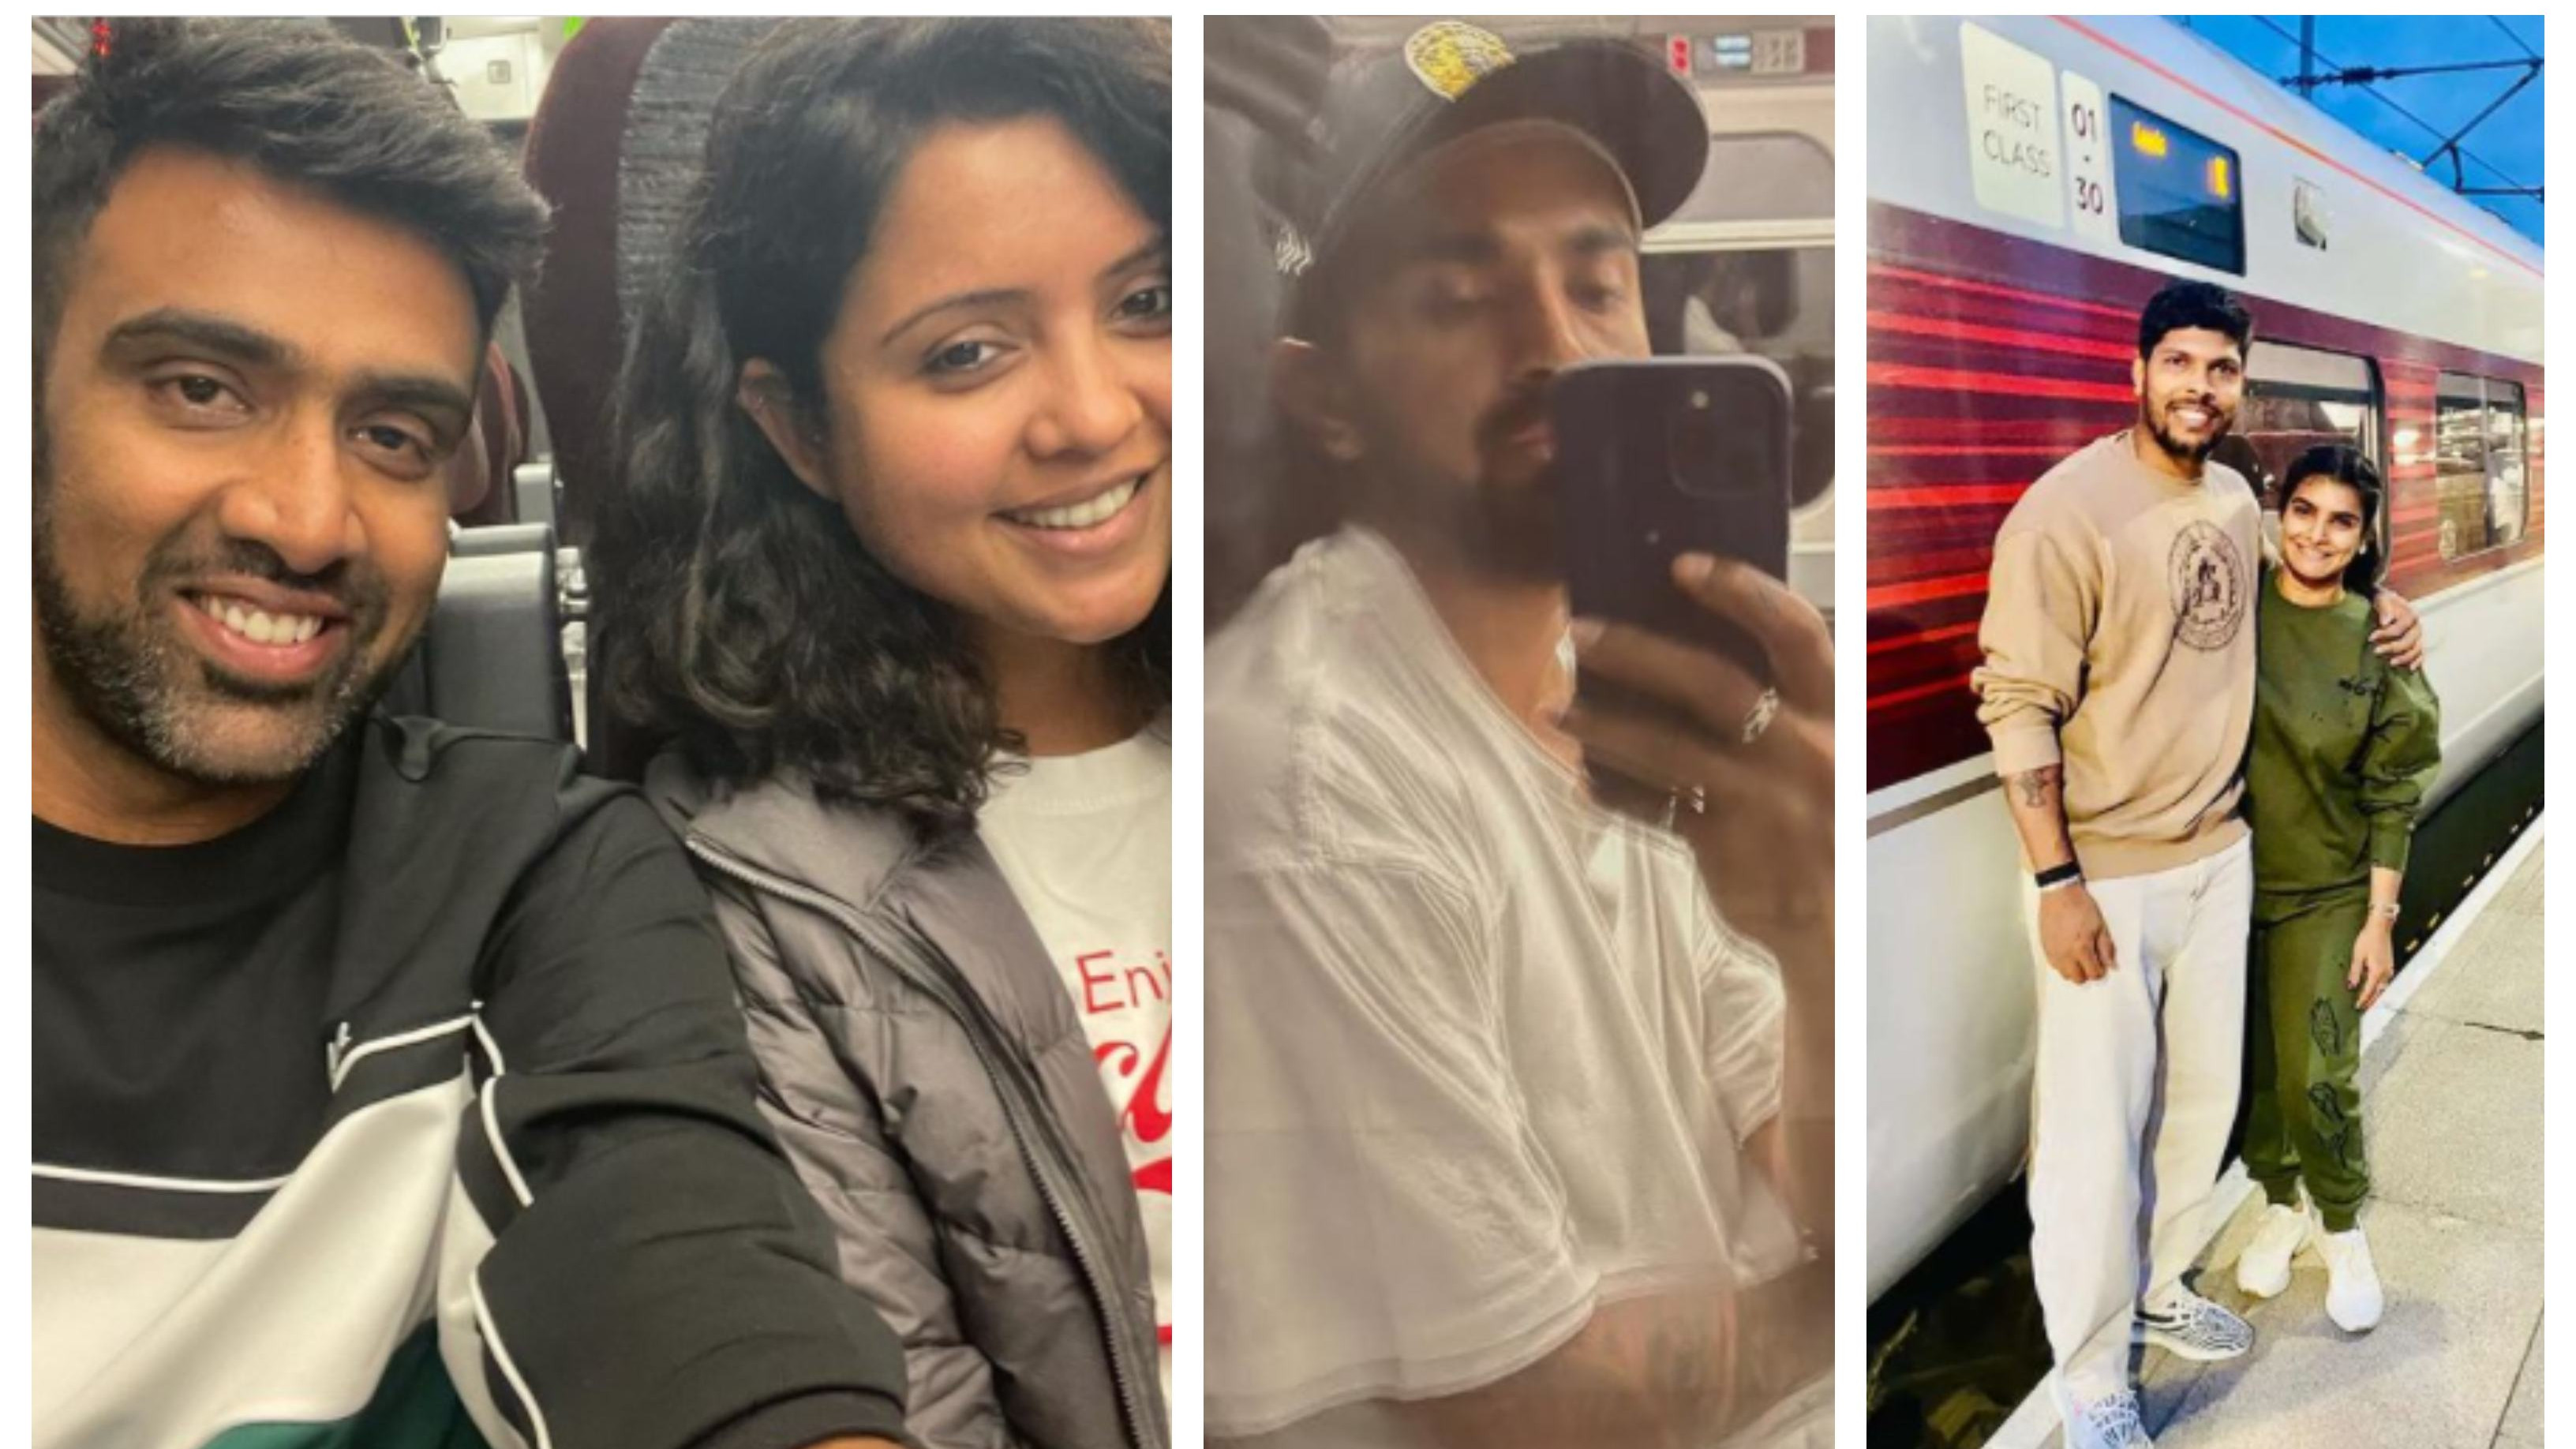 ENG v IND 2021: See Pics – Team India members board train to travel from Leeds to London for 4th Test